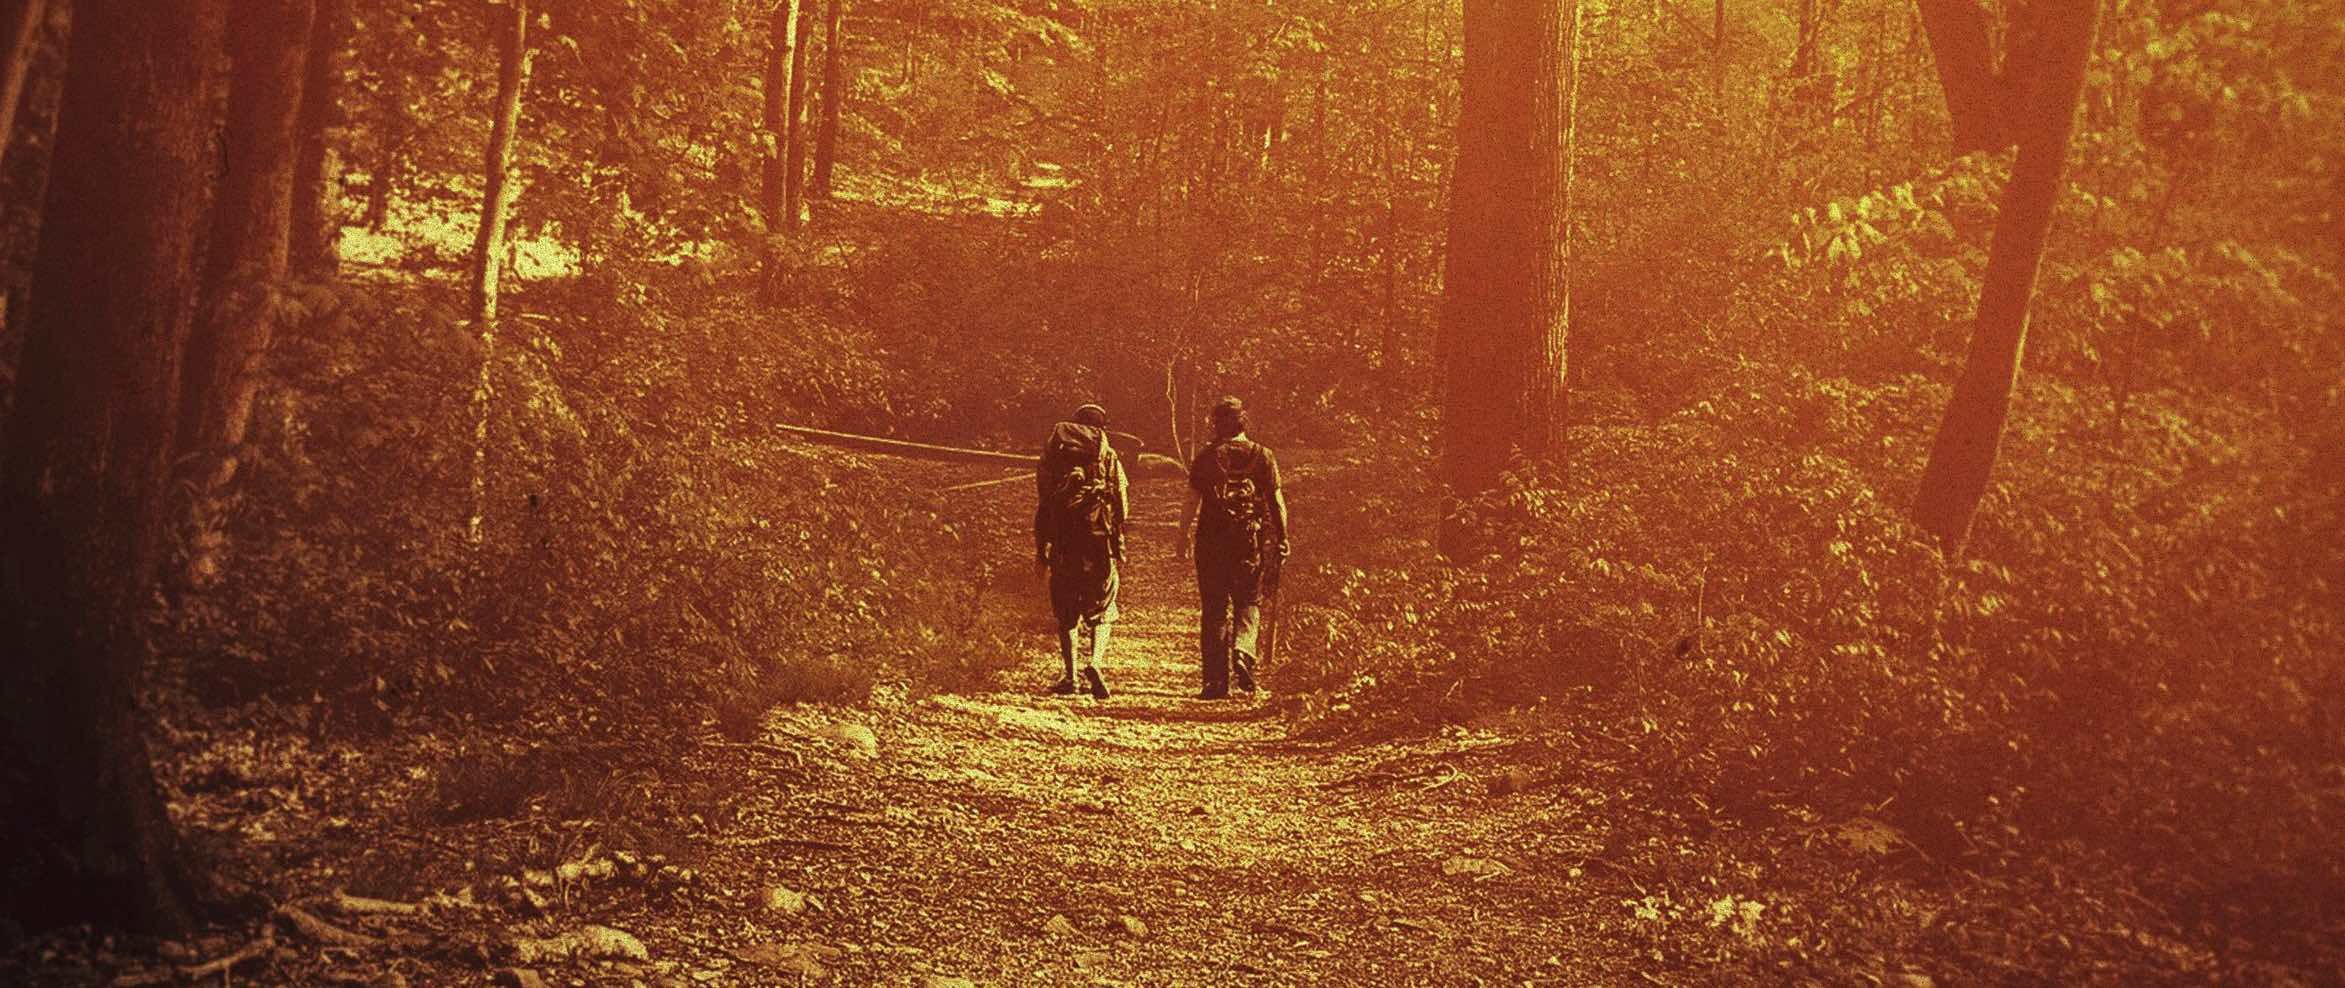 Into the wild: Gardner and Cronheim enter the forest in "The Battery" / Photo courtesy of O hannah Films.